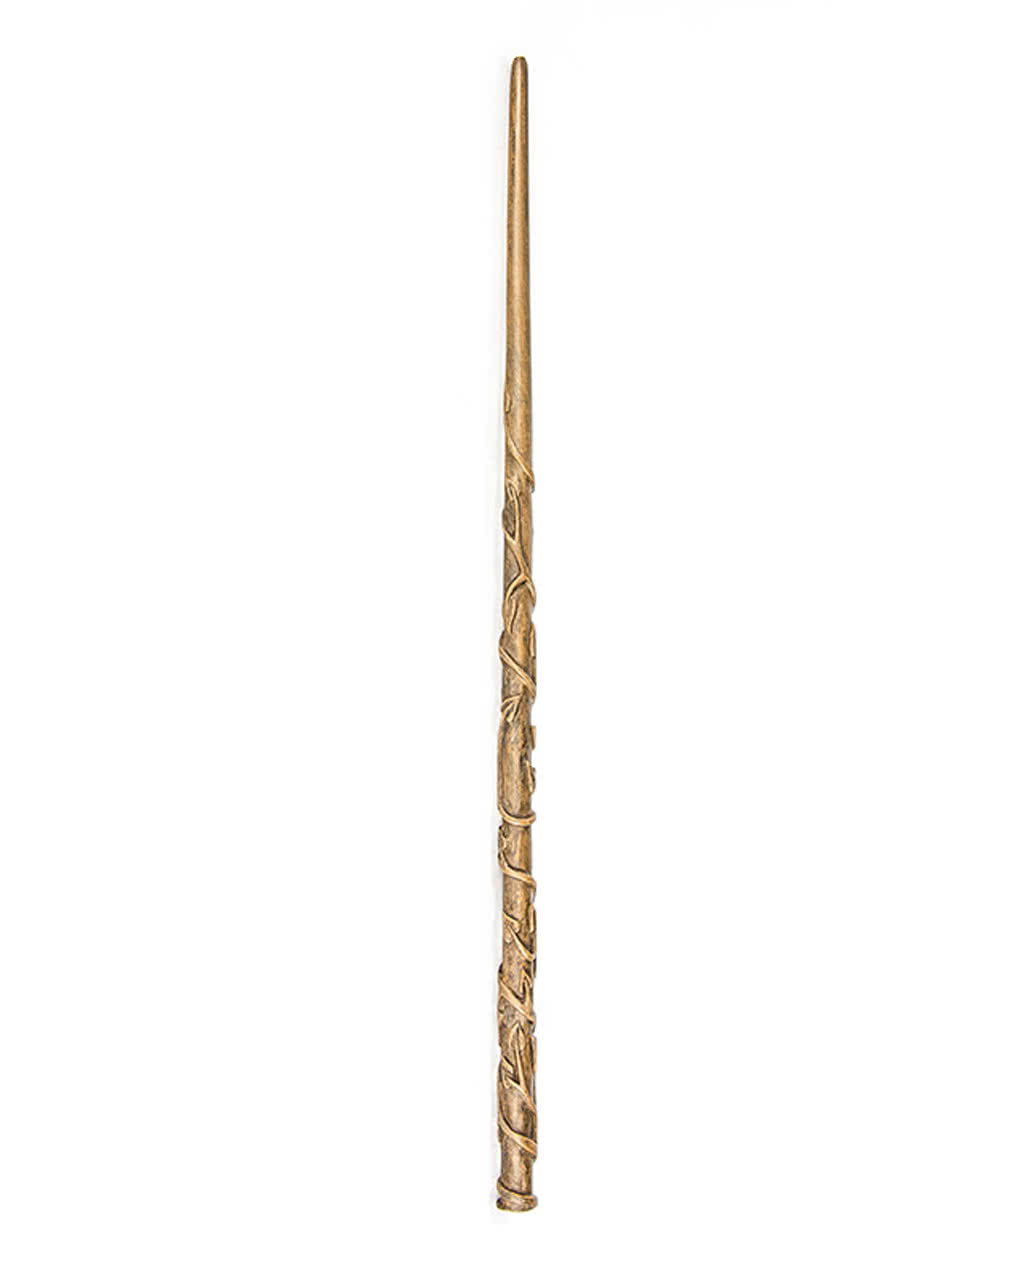 Hermione Granger's wand Classic from Harry Potter | horror-shop.com